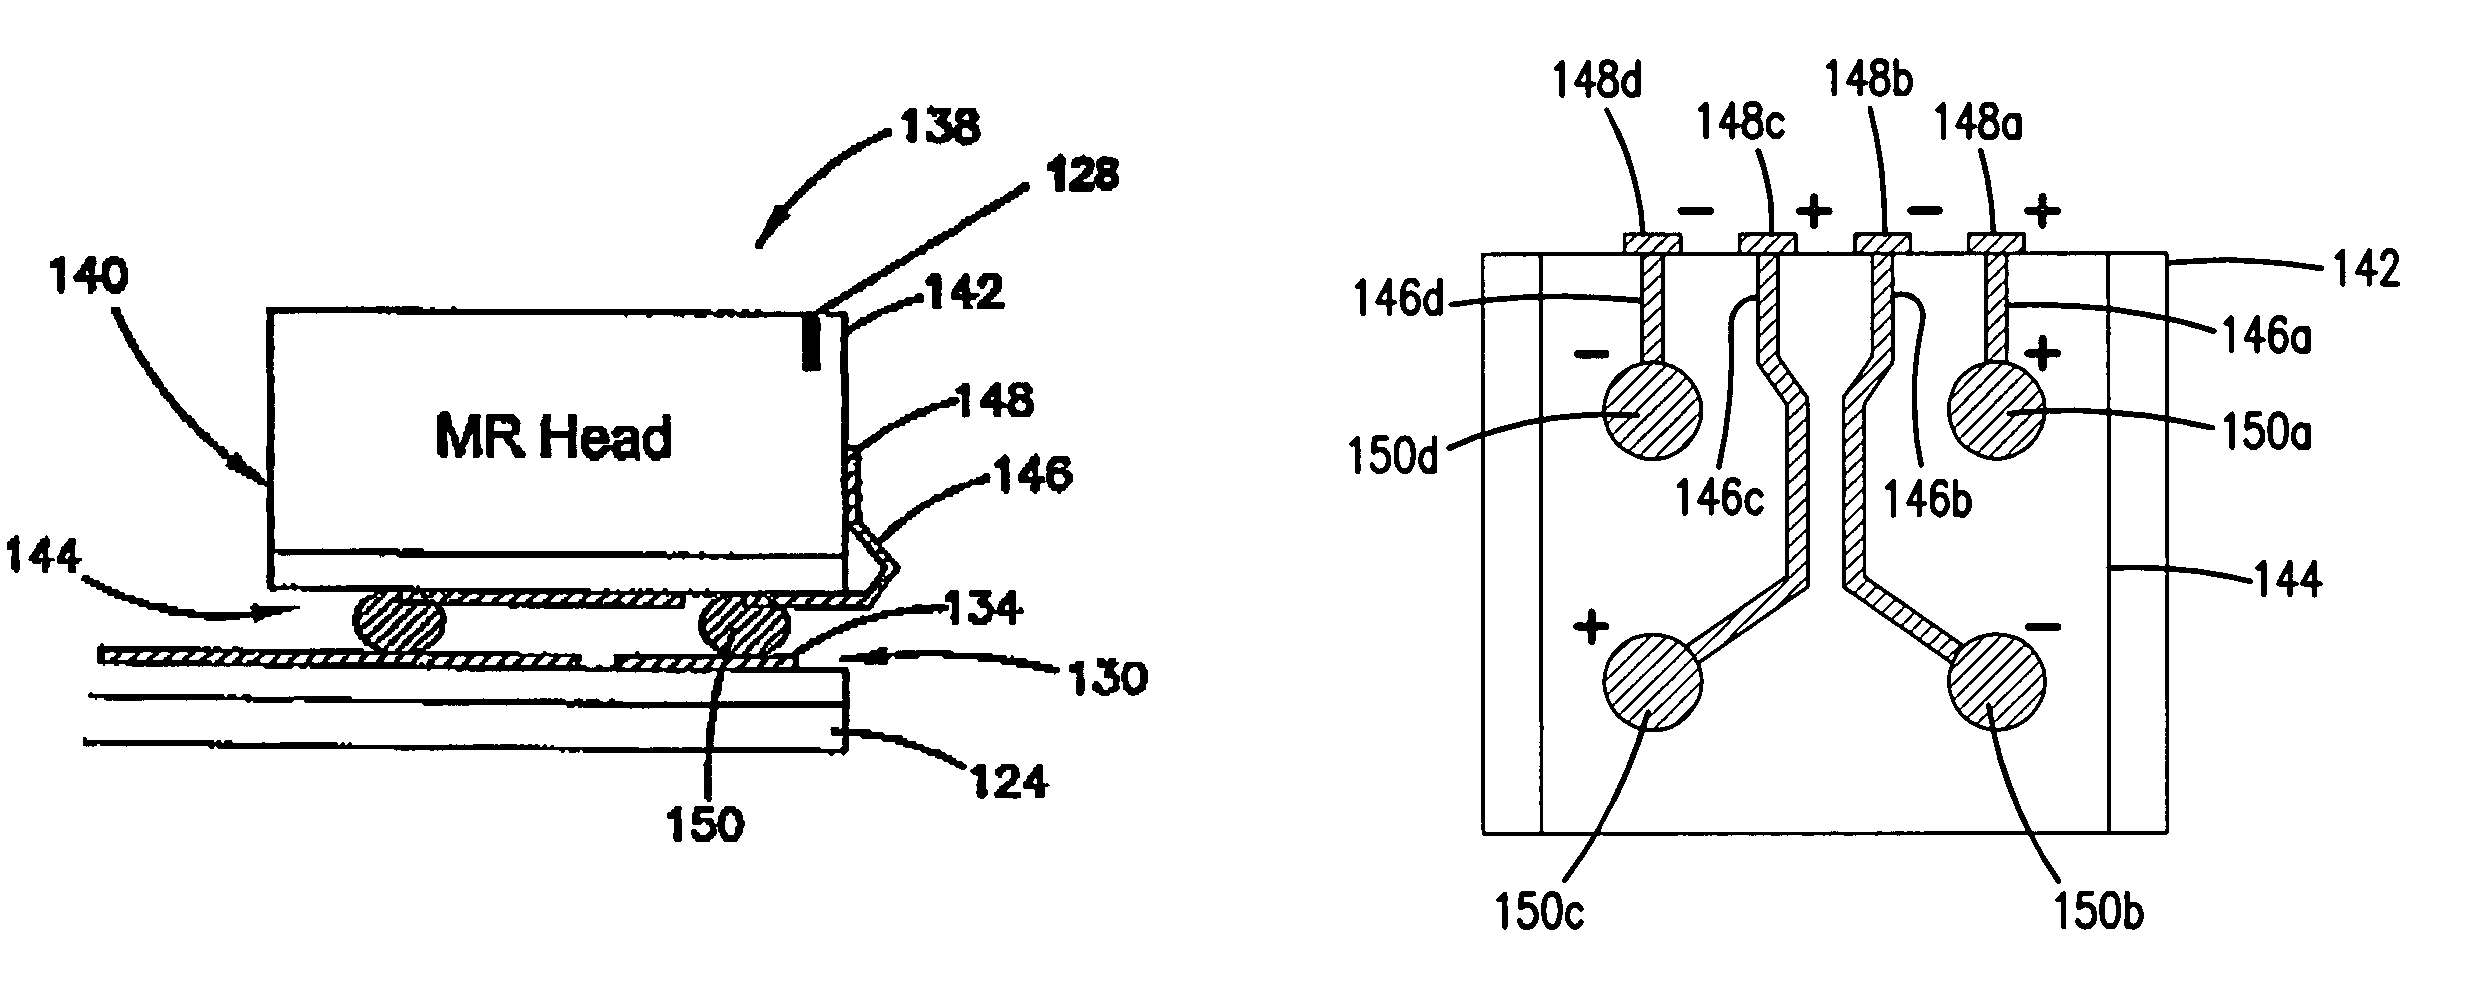 Head gimbal assembly with flex circuit arrangement between slider and head interconnect assembly